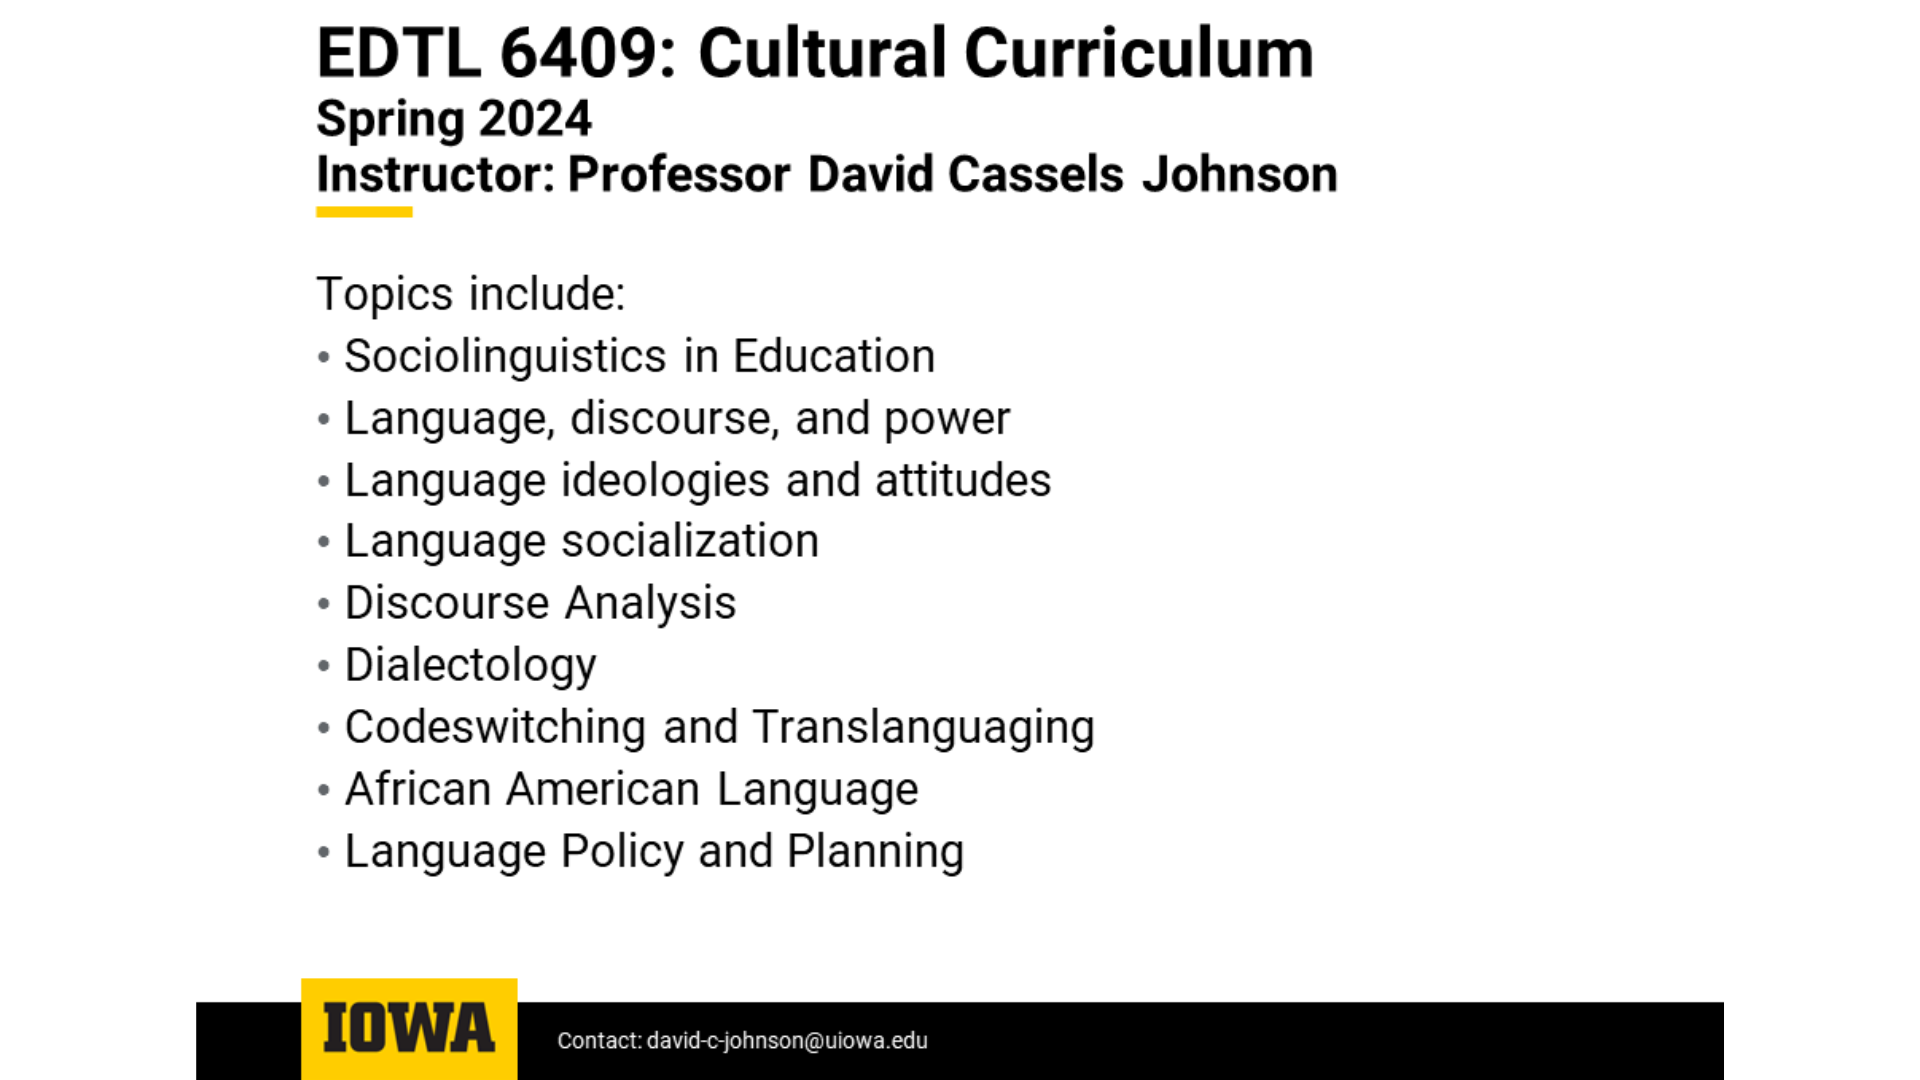 EDTL 6409 - Cultural Curriculum - Spring 2024 - Professor David Cassels Johnson - Topic include, sociolinguistics in education; language, discourse, and power; language socialization; dialectology; codeswitching and translanguaging; African American language; language policy and planning.